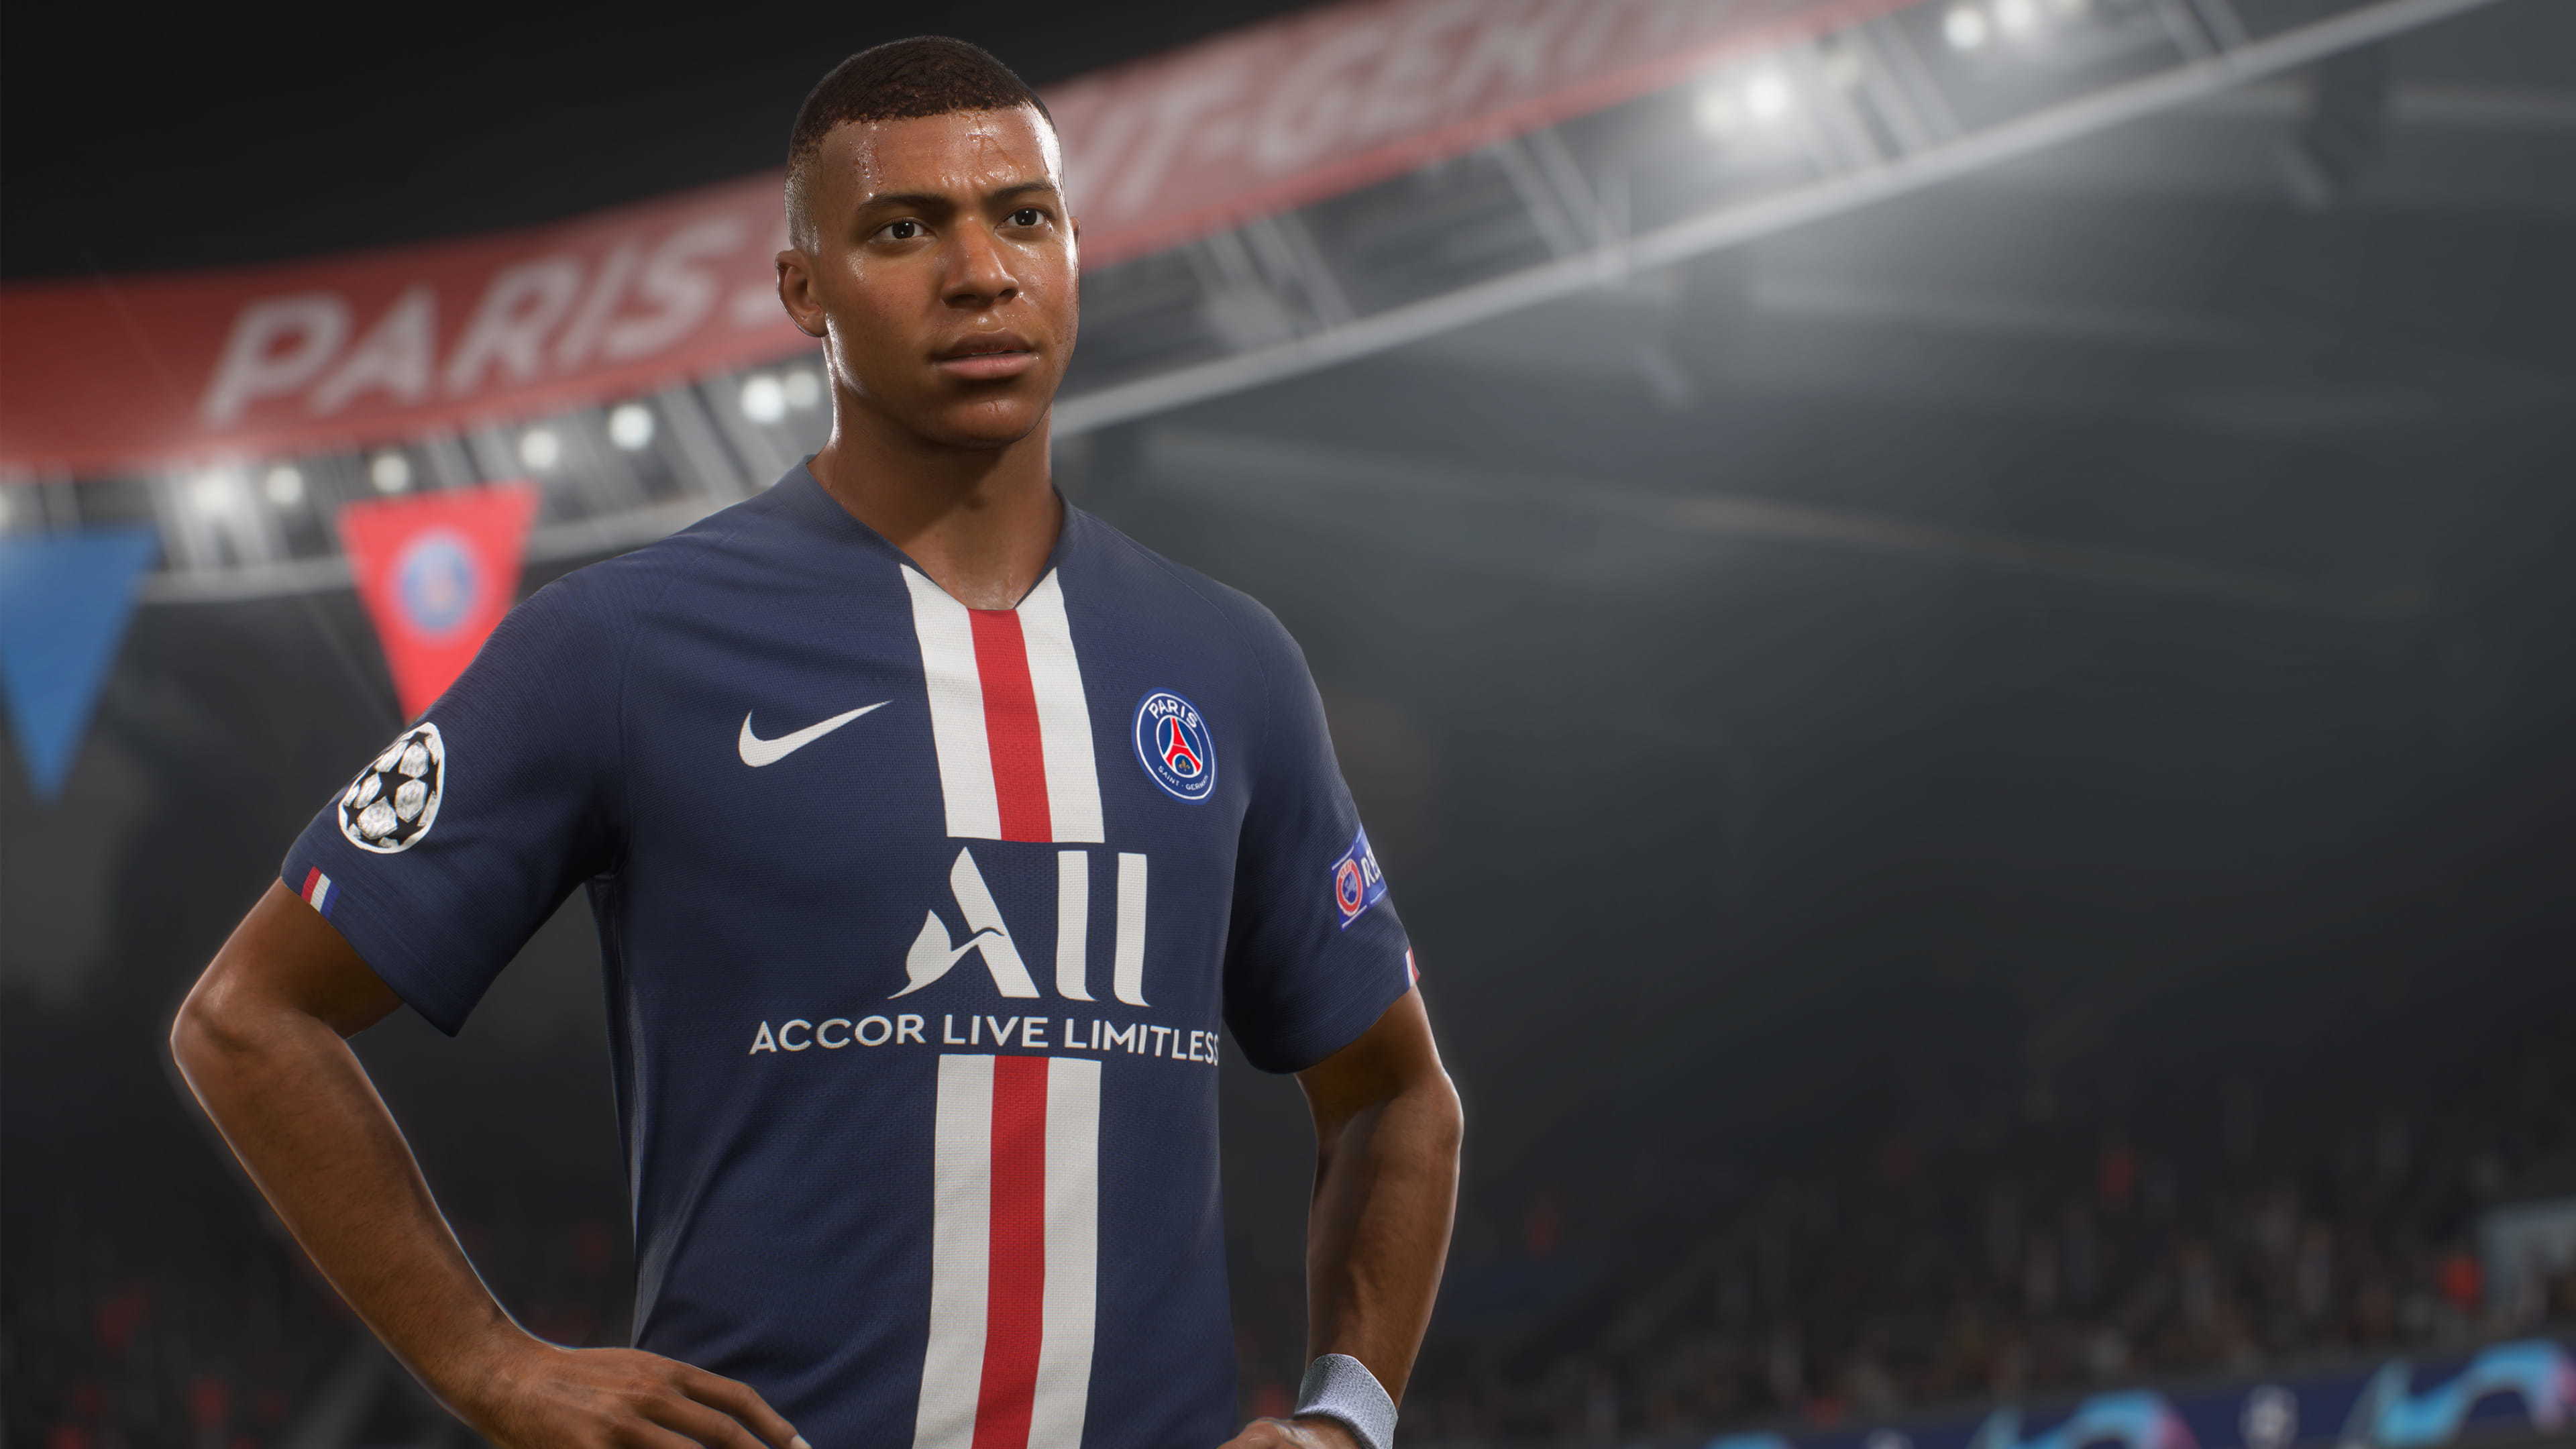 New trailer shows off more of FIFA 21